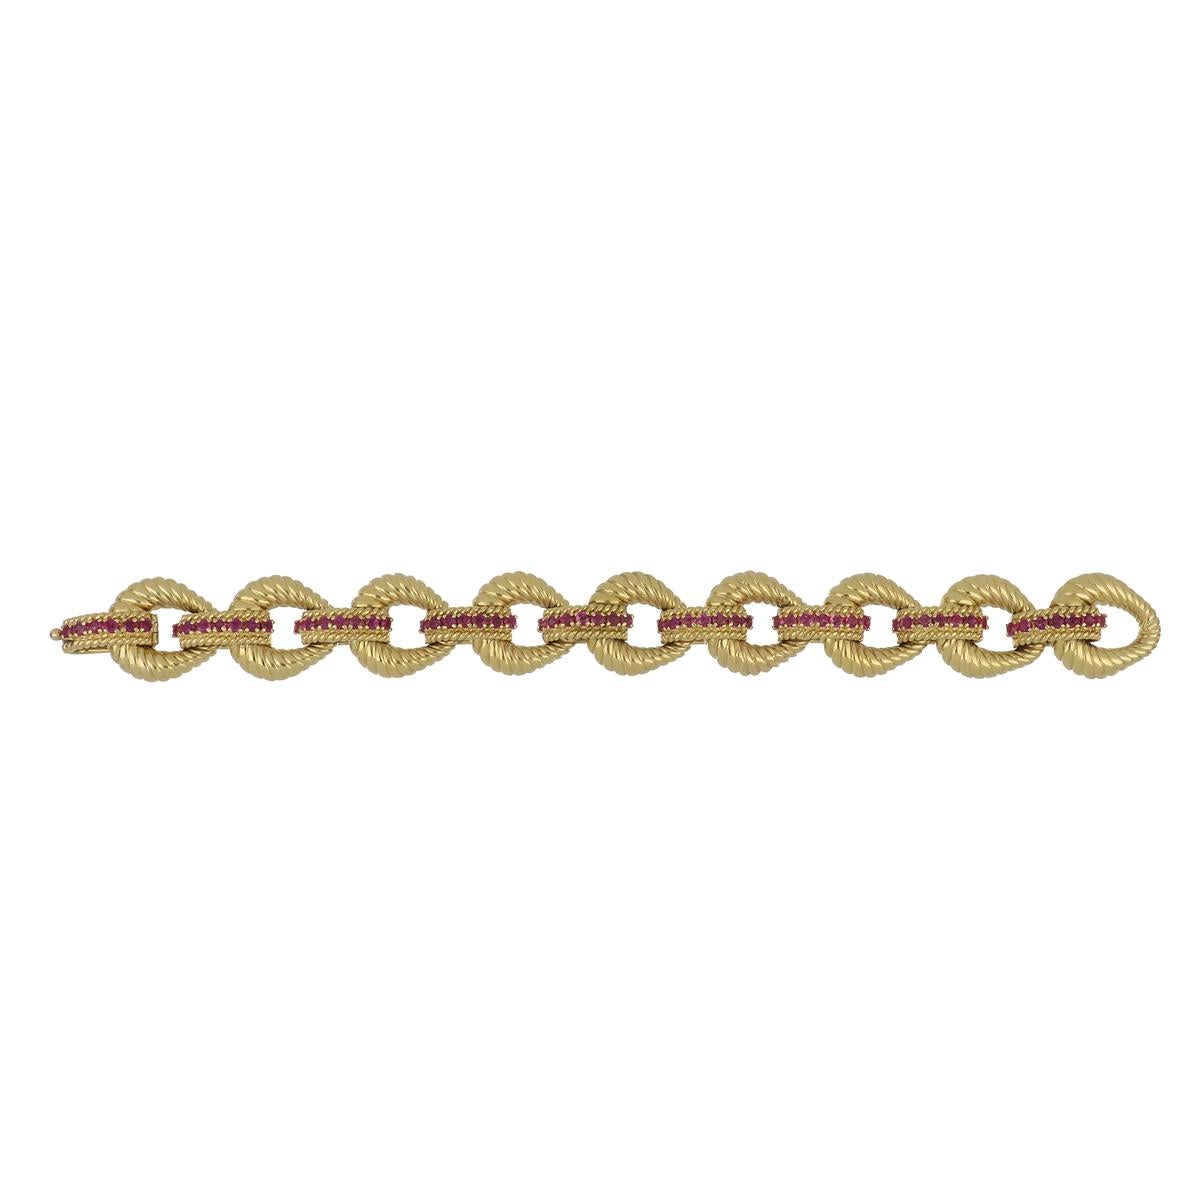 Tiffany & Co. 18K yellow gold heavy twisted-link bracelet accented with round rubies that total 4.73 carats. American, circa 1960.

